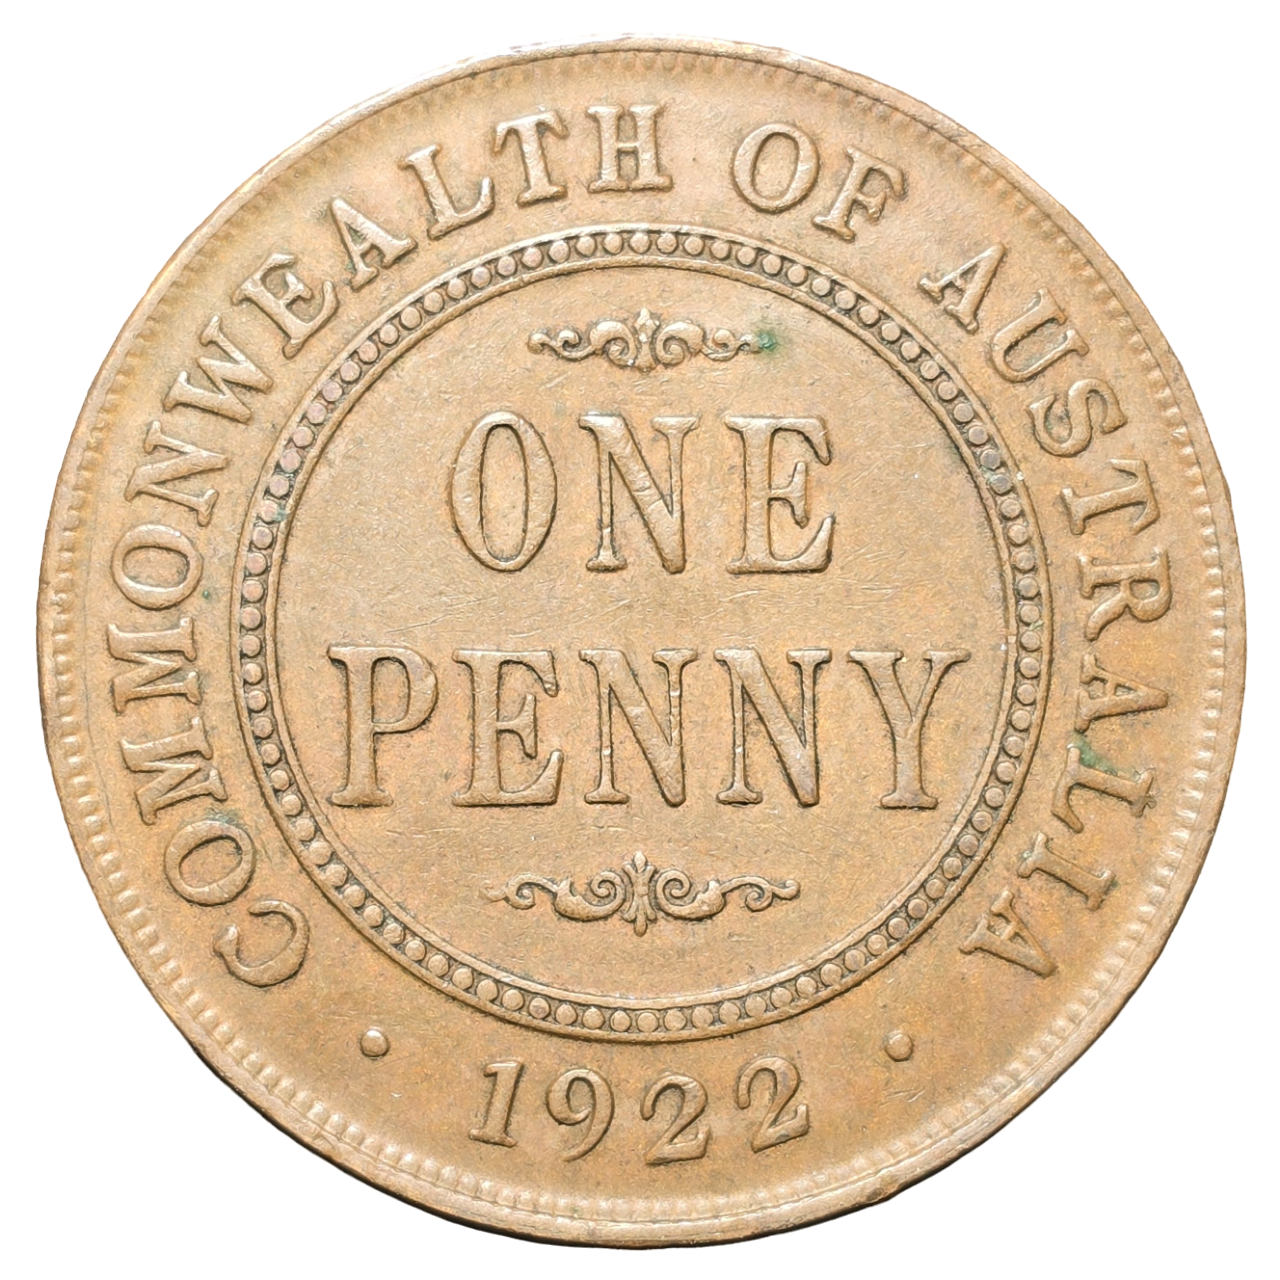 1922 Australian Penny - Extremely Fine - Indian Obverse with Curve Base Lettering